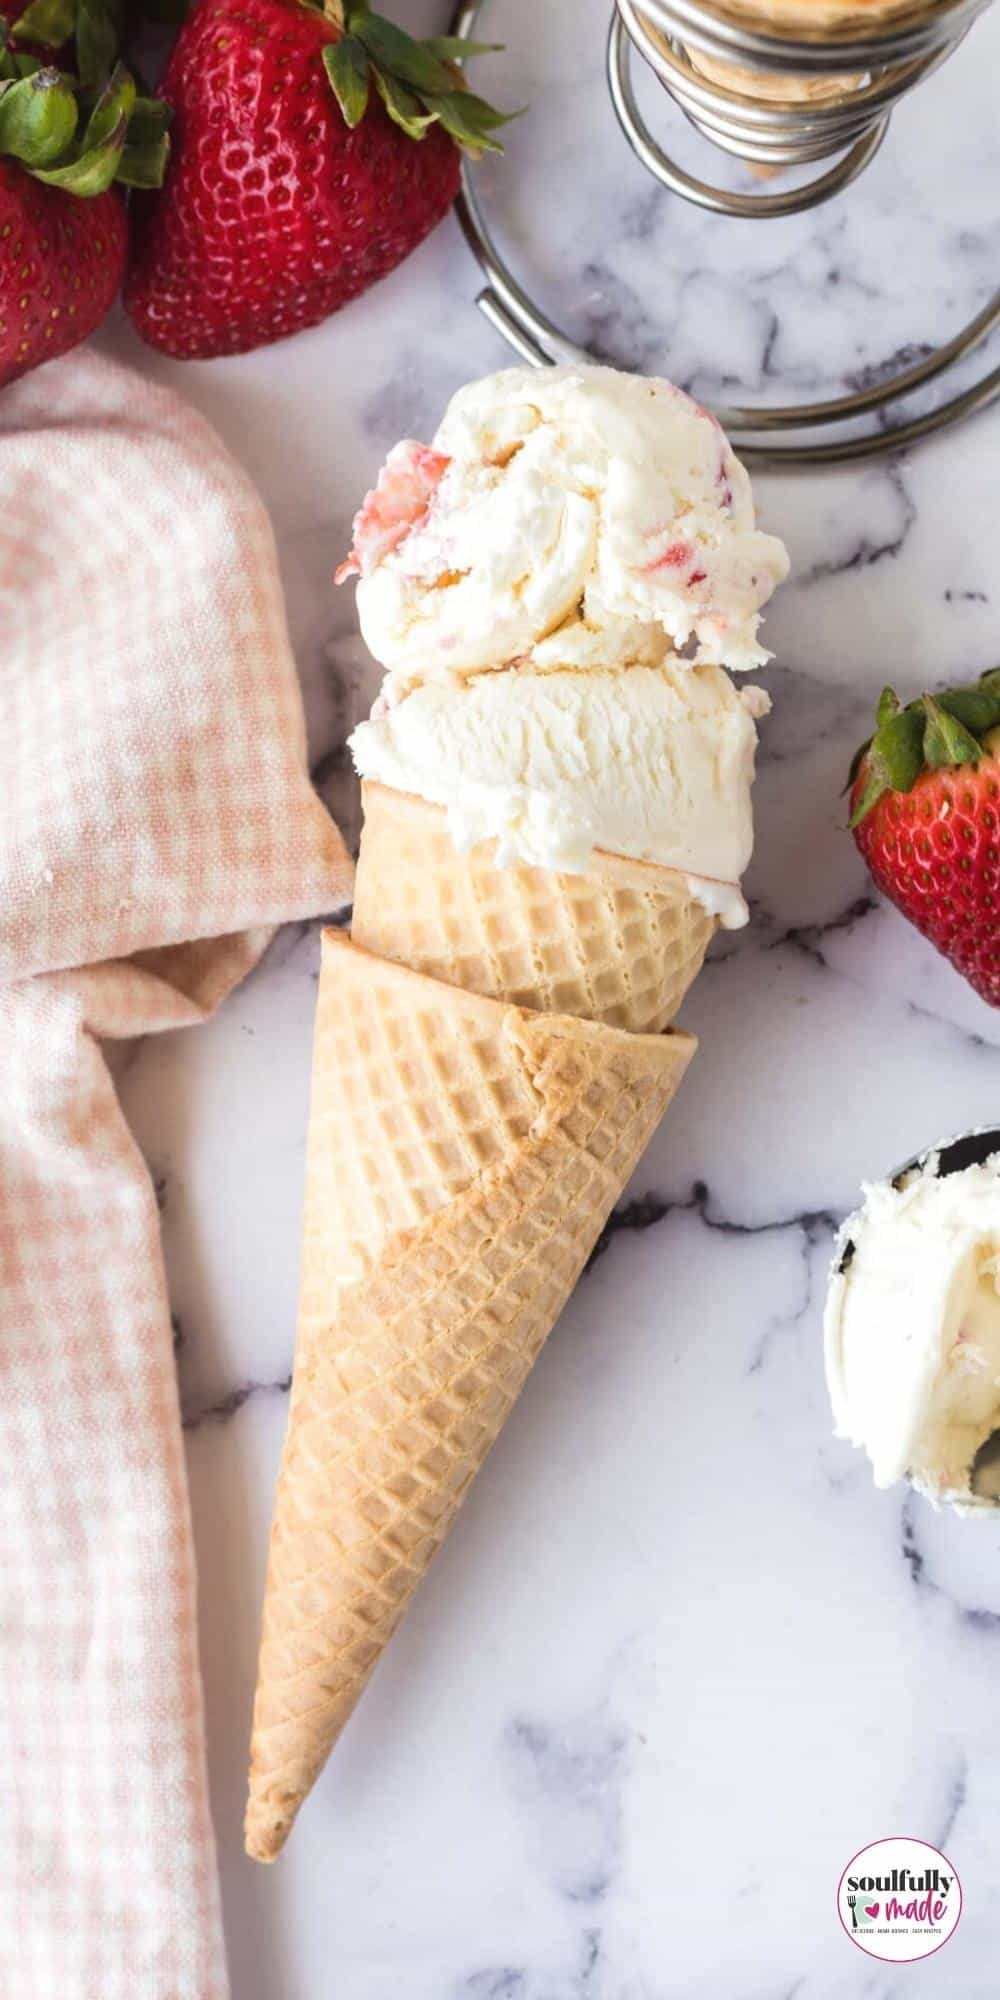 A waffle cone filled with two scoops of strawberry ice cream.